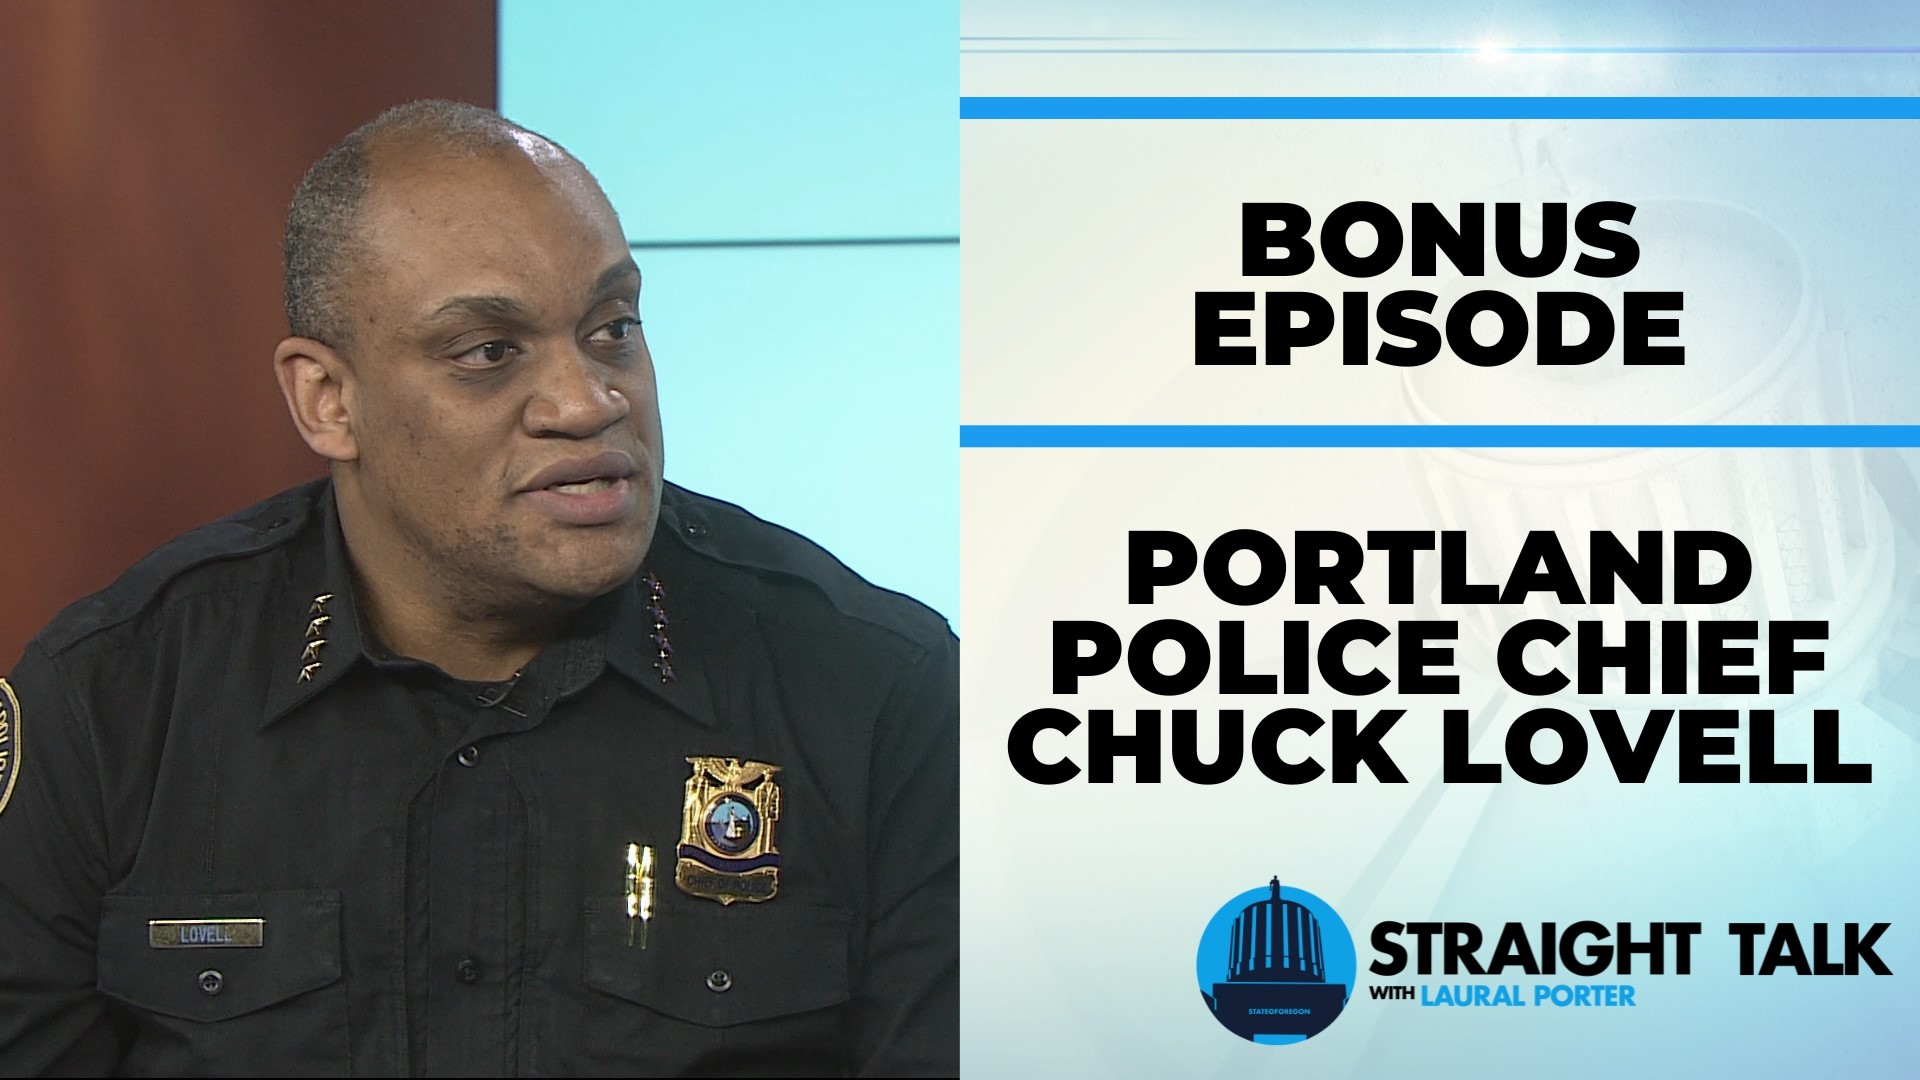 Portland Police Chief Chuck Lovell stuck around for a bonus interview after this week's episode of Straight Talk.